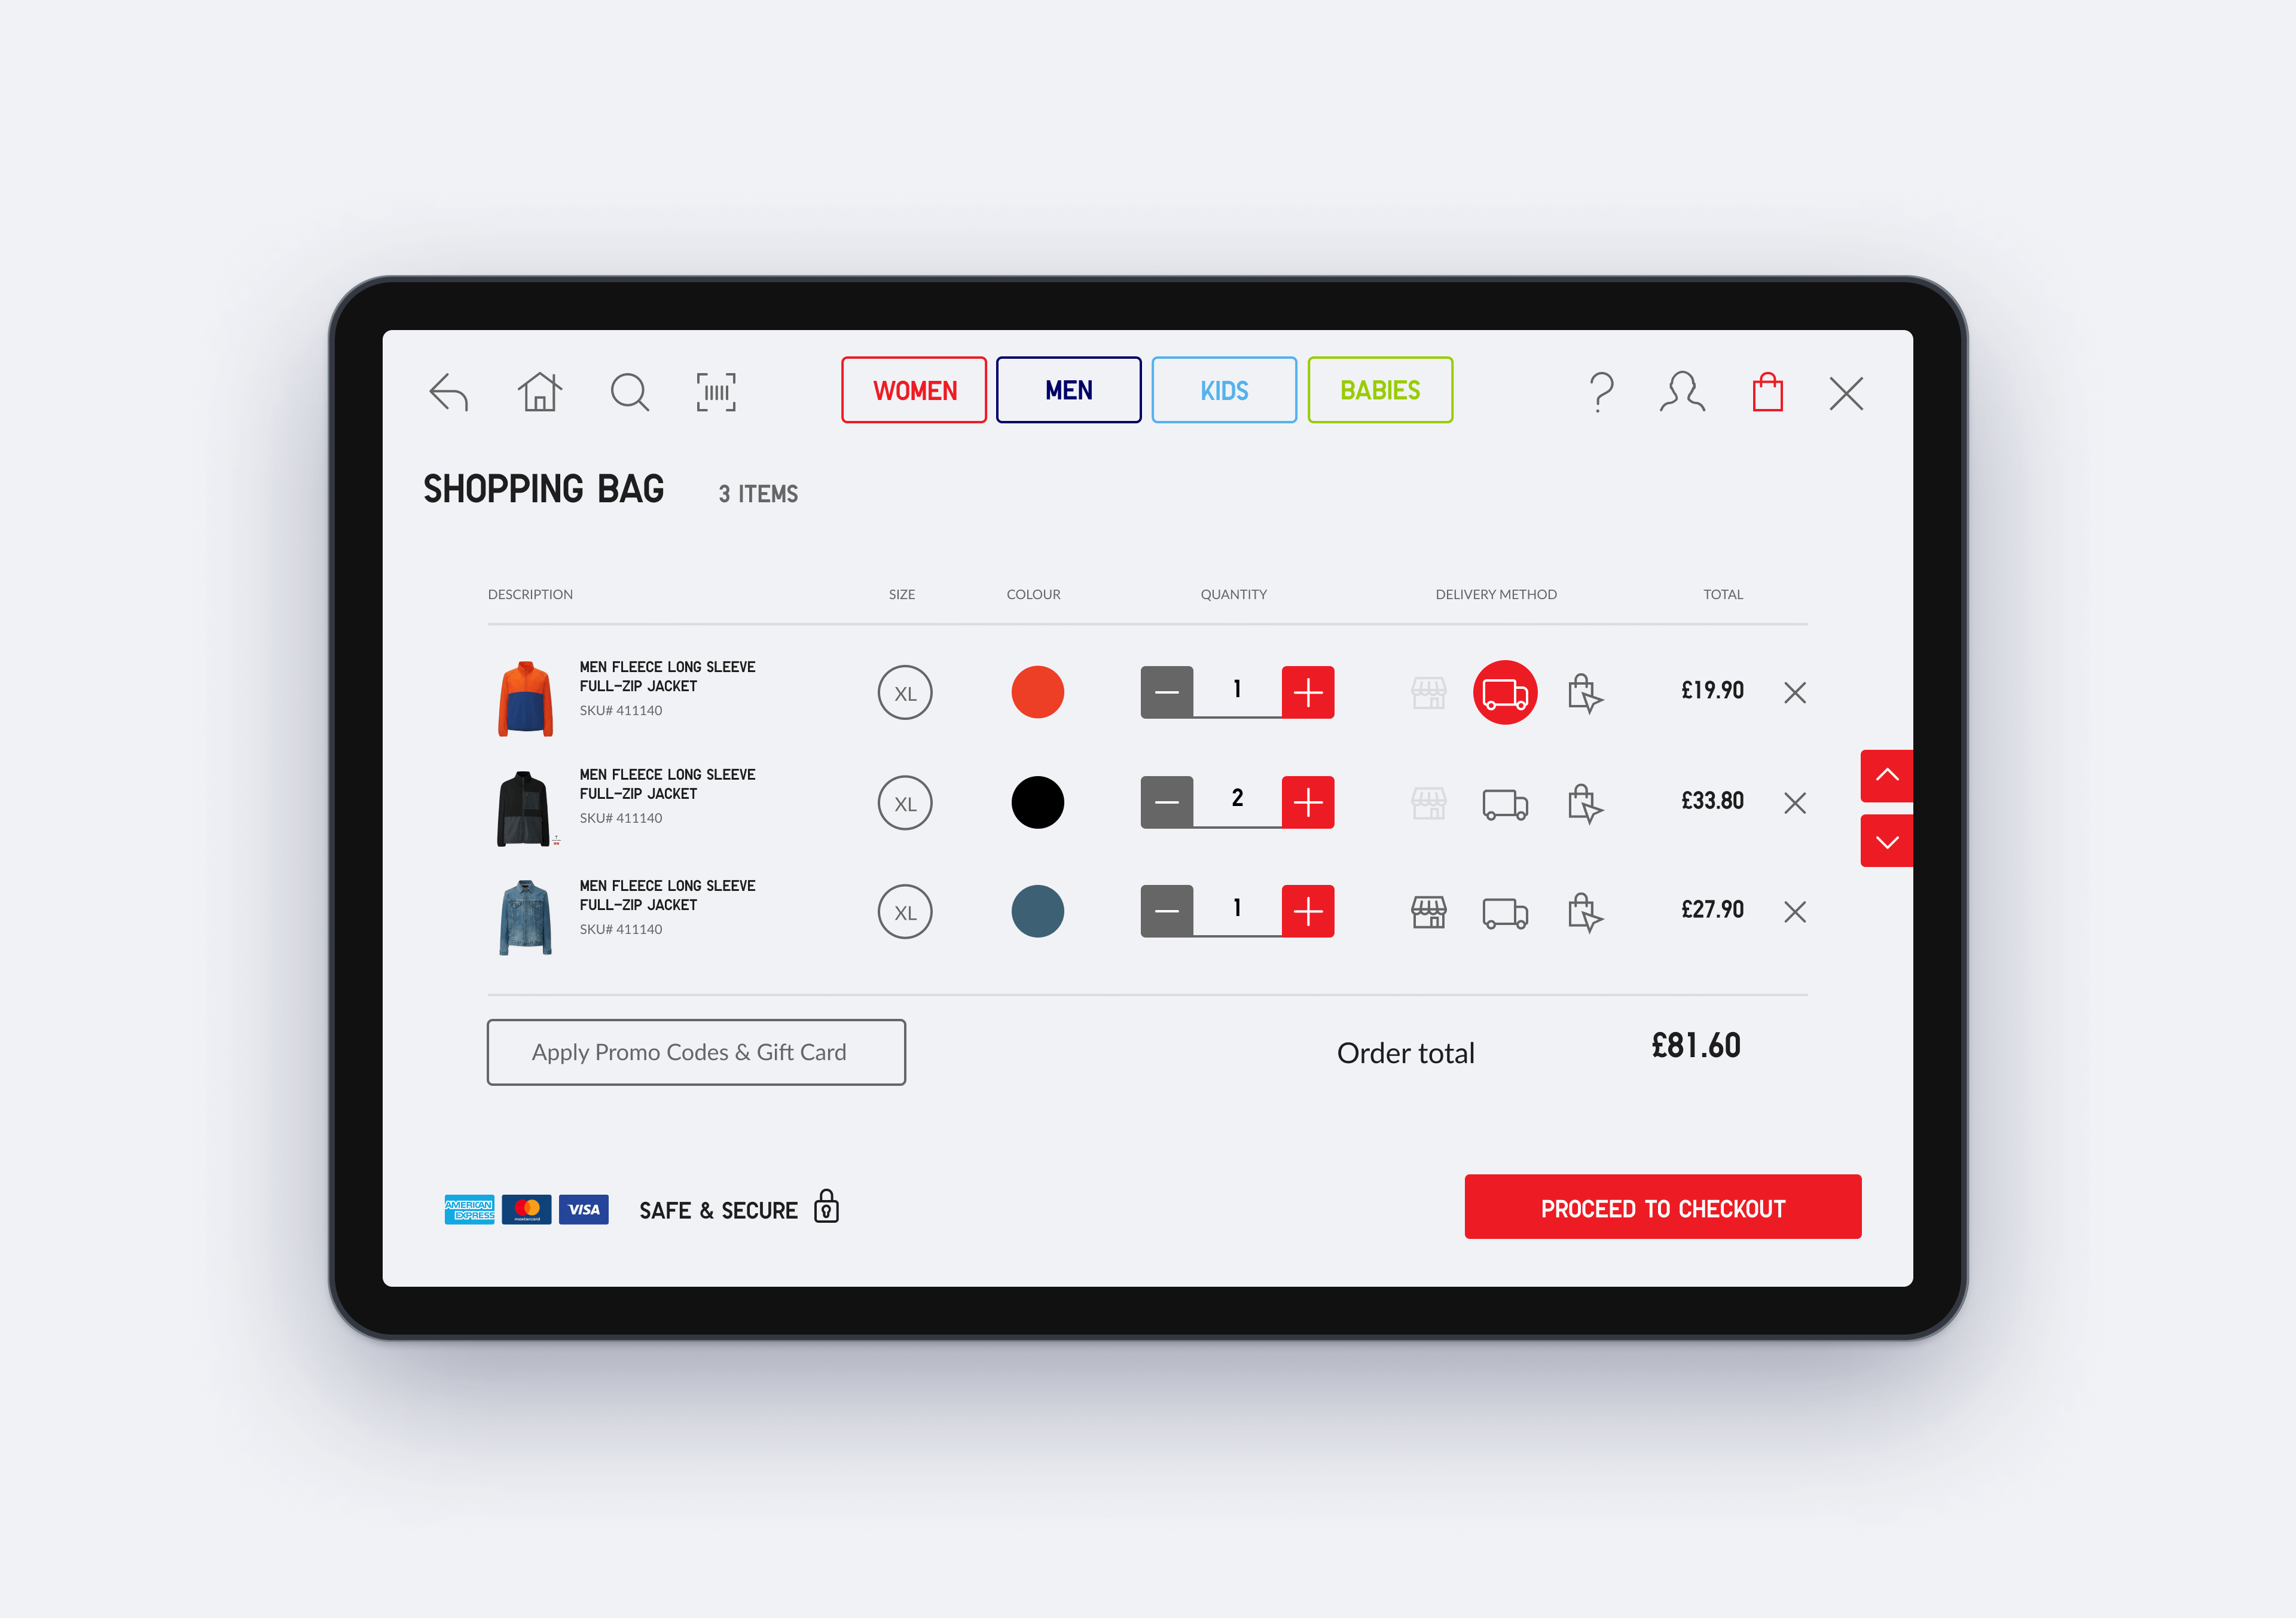 The Uniqlo kiosk screen design for the basket functionality